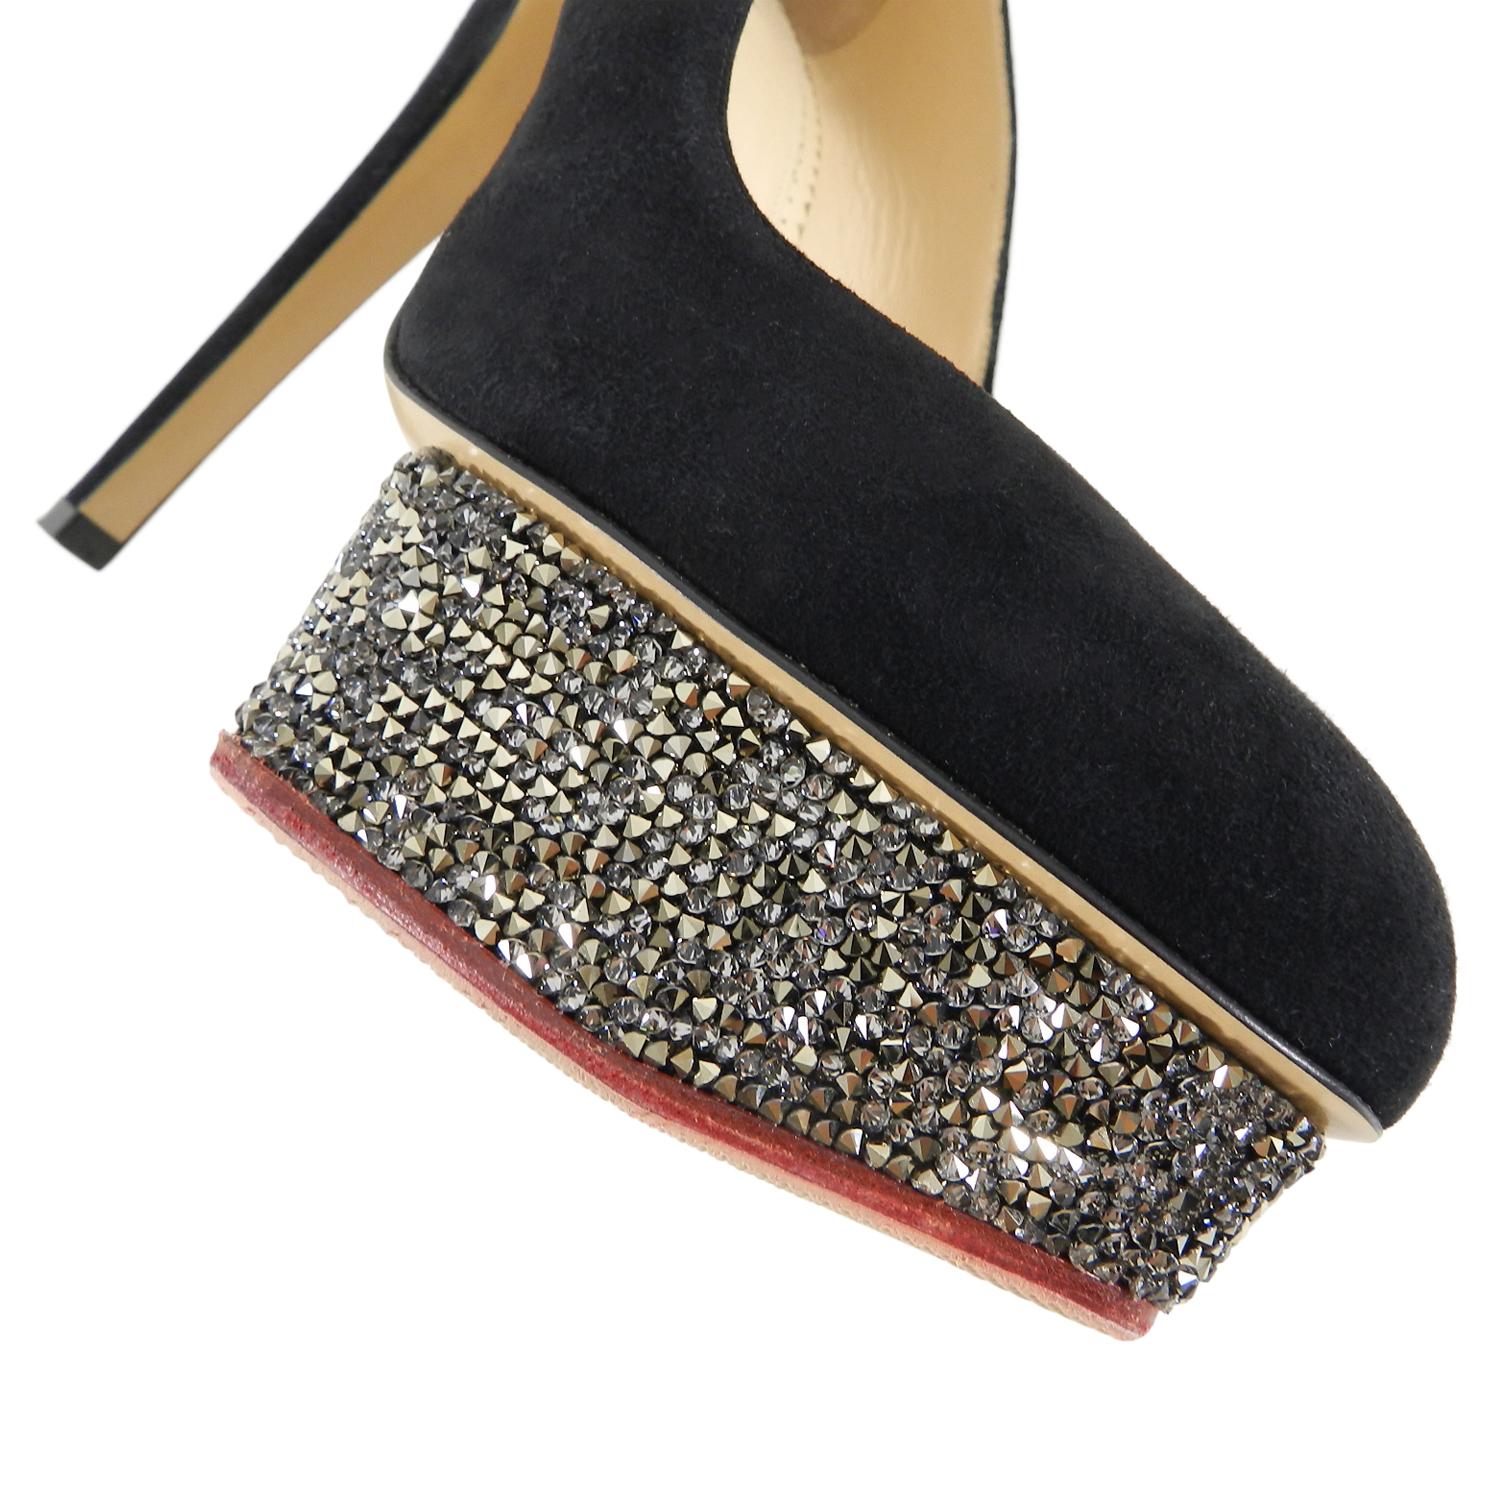 Charlotte Olympia Dolly Crystal Suede 150 mm Platform Pumps - 41 1